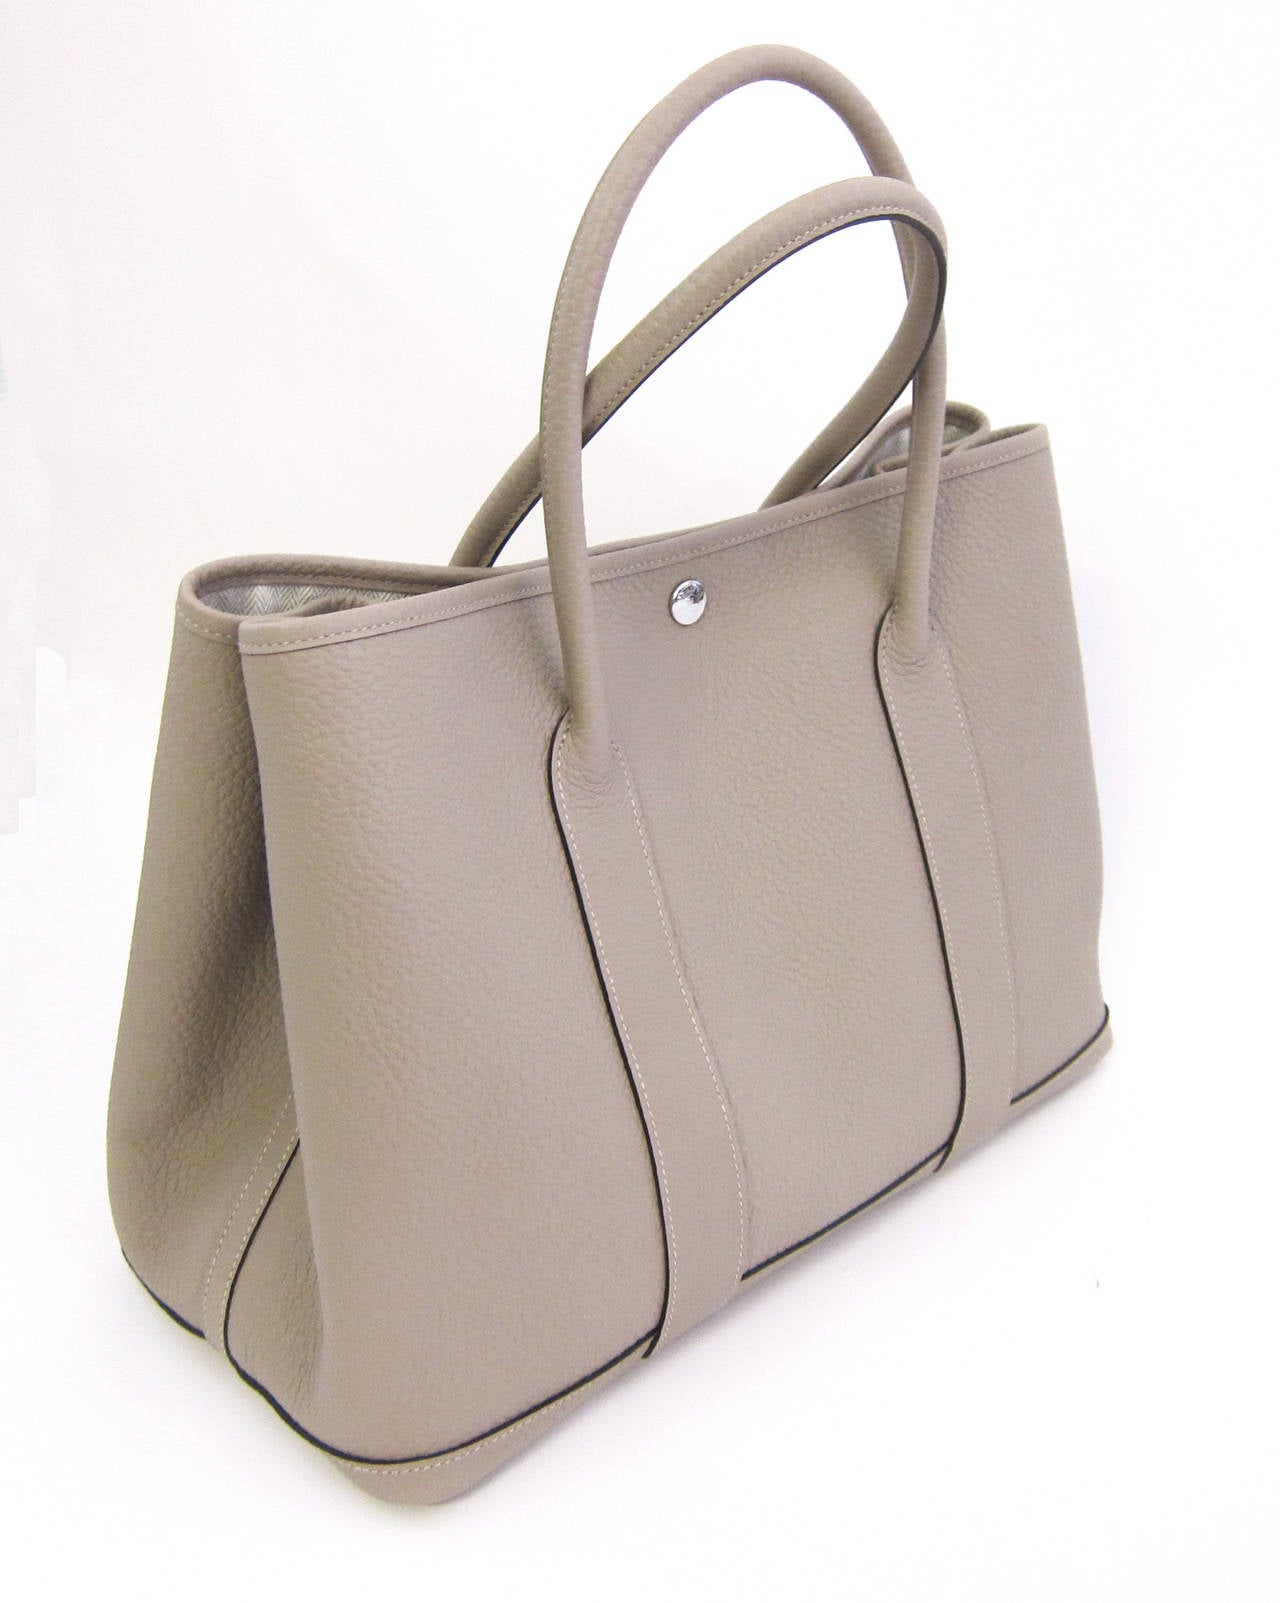 Hermes GRIS TOURTERELLE GARDEN PARTY MM 36cm TOTE  

Brand new in box.  Perfect gift.  Comes store fresh with original Hermes sleeper, box, and ribbon

Very rare Gris Tourterelle Garden Party!  This is one of the most beloved colors from Hermes